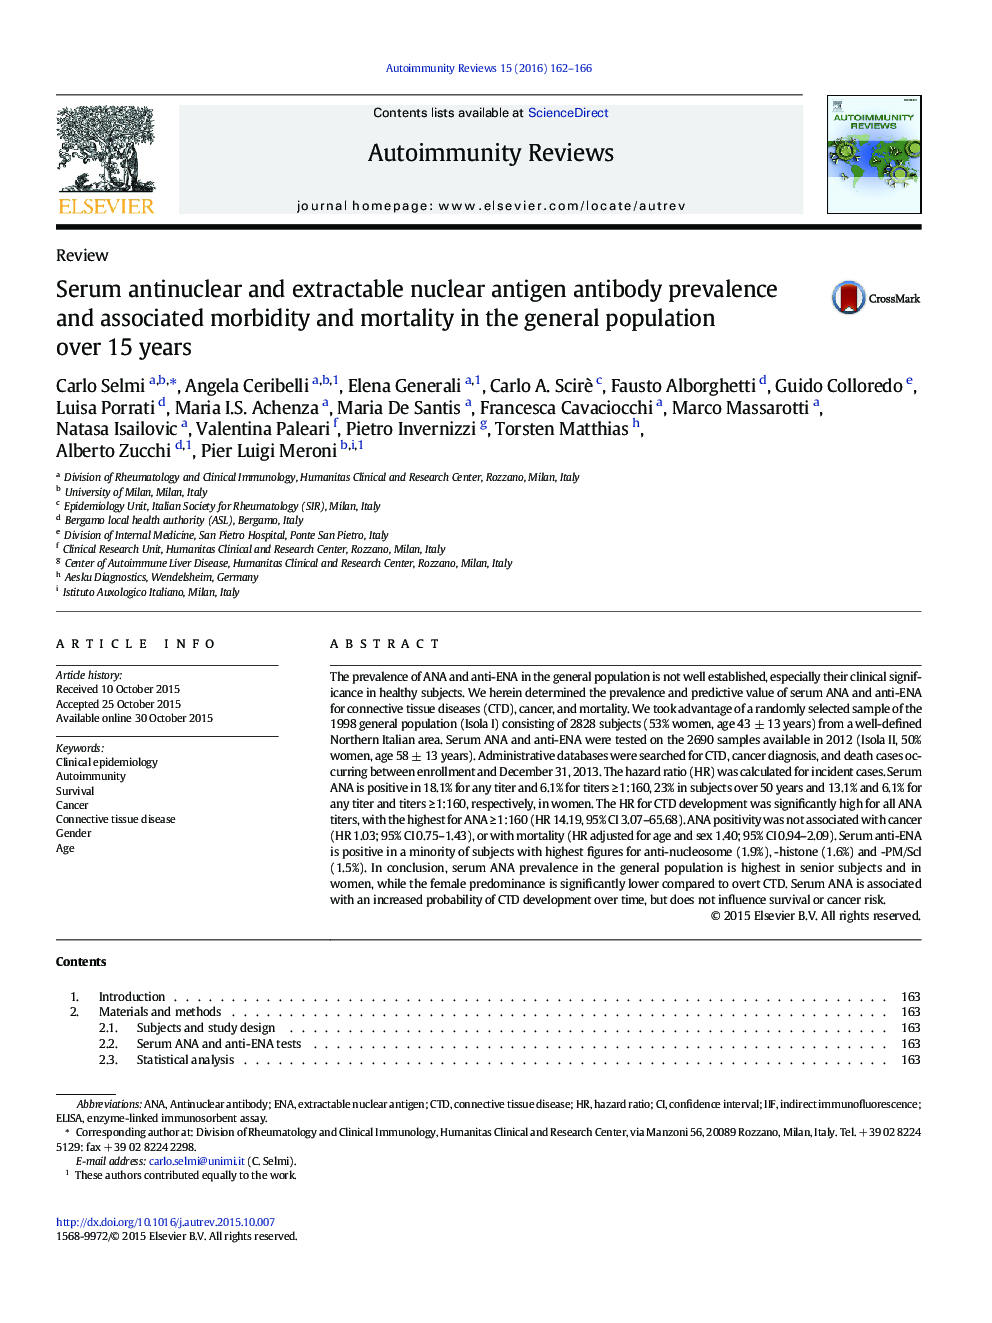 Serum antinuclear and extractable nuclear antigen antibody prevalence and associated morbidity and mortality in the general population over 15 years